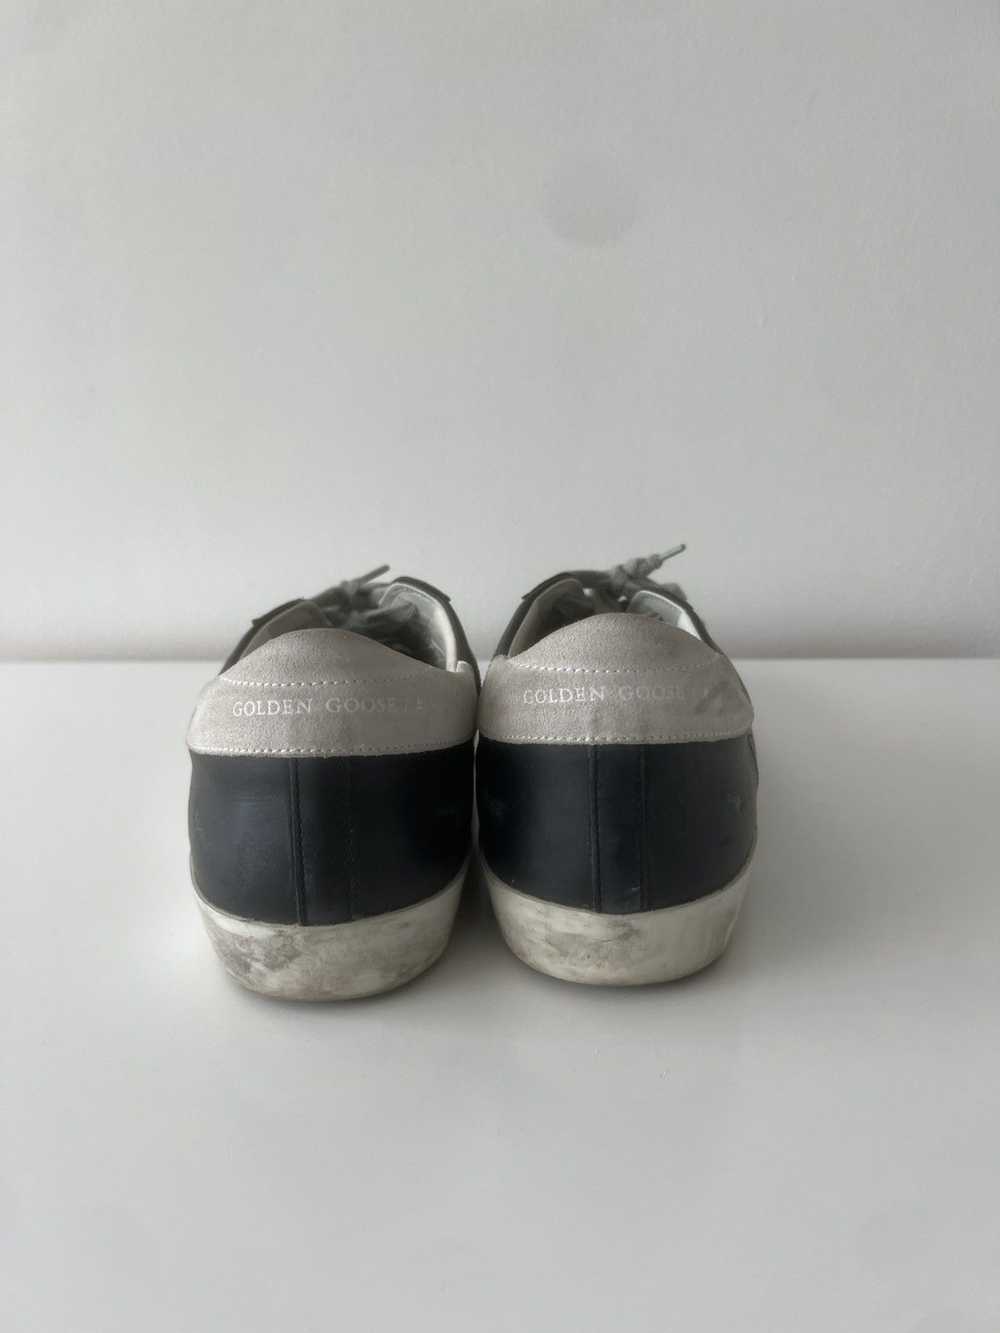 Golden Goose Golden Goose Lowtop Shoes - image 4